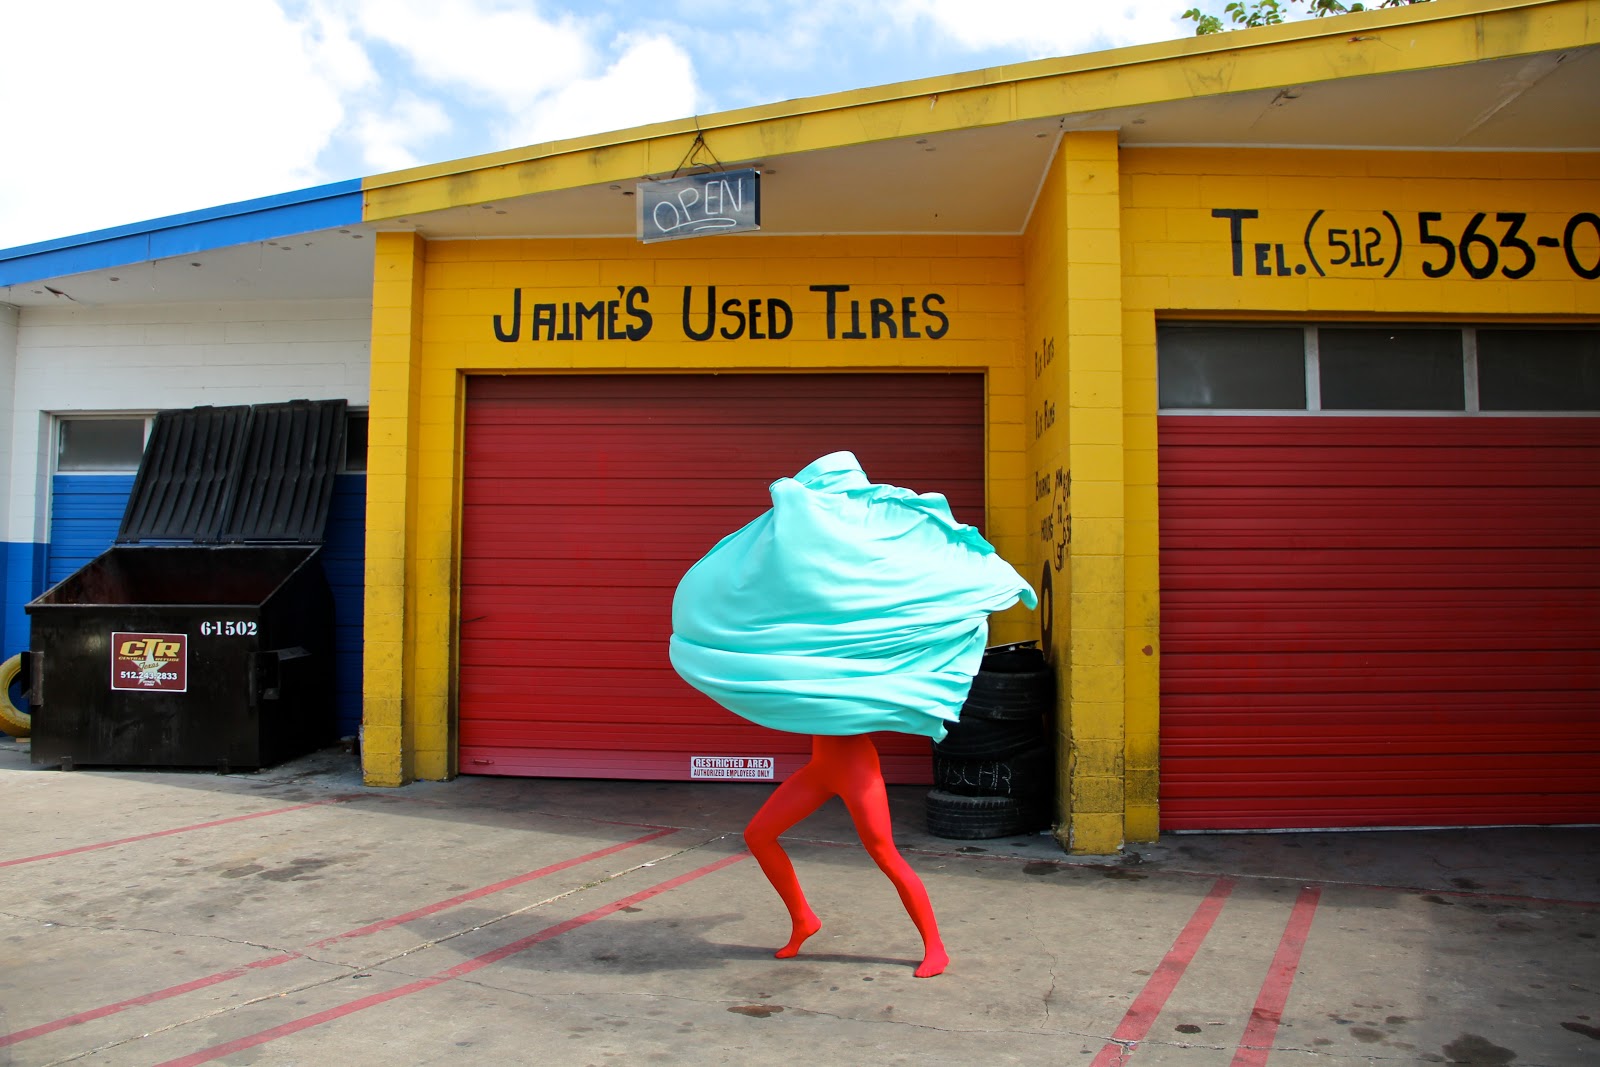 A figure in a red bodysuit and large bundle of icy blue fabric covering the top half of their body walking across a driveway. In the background is a yellow building with red garage doors and a sign that reads “Jaime’s Used Tires”.